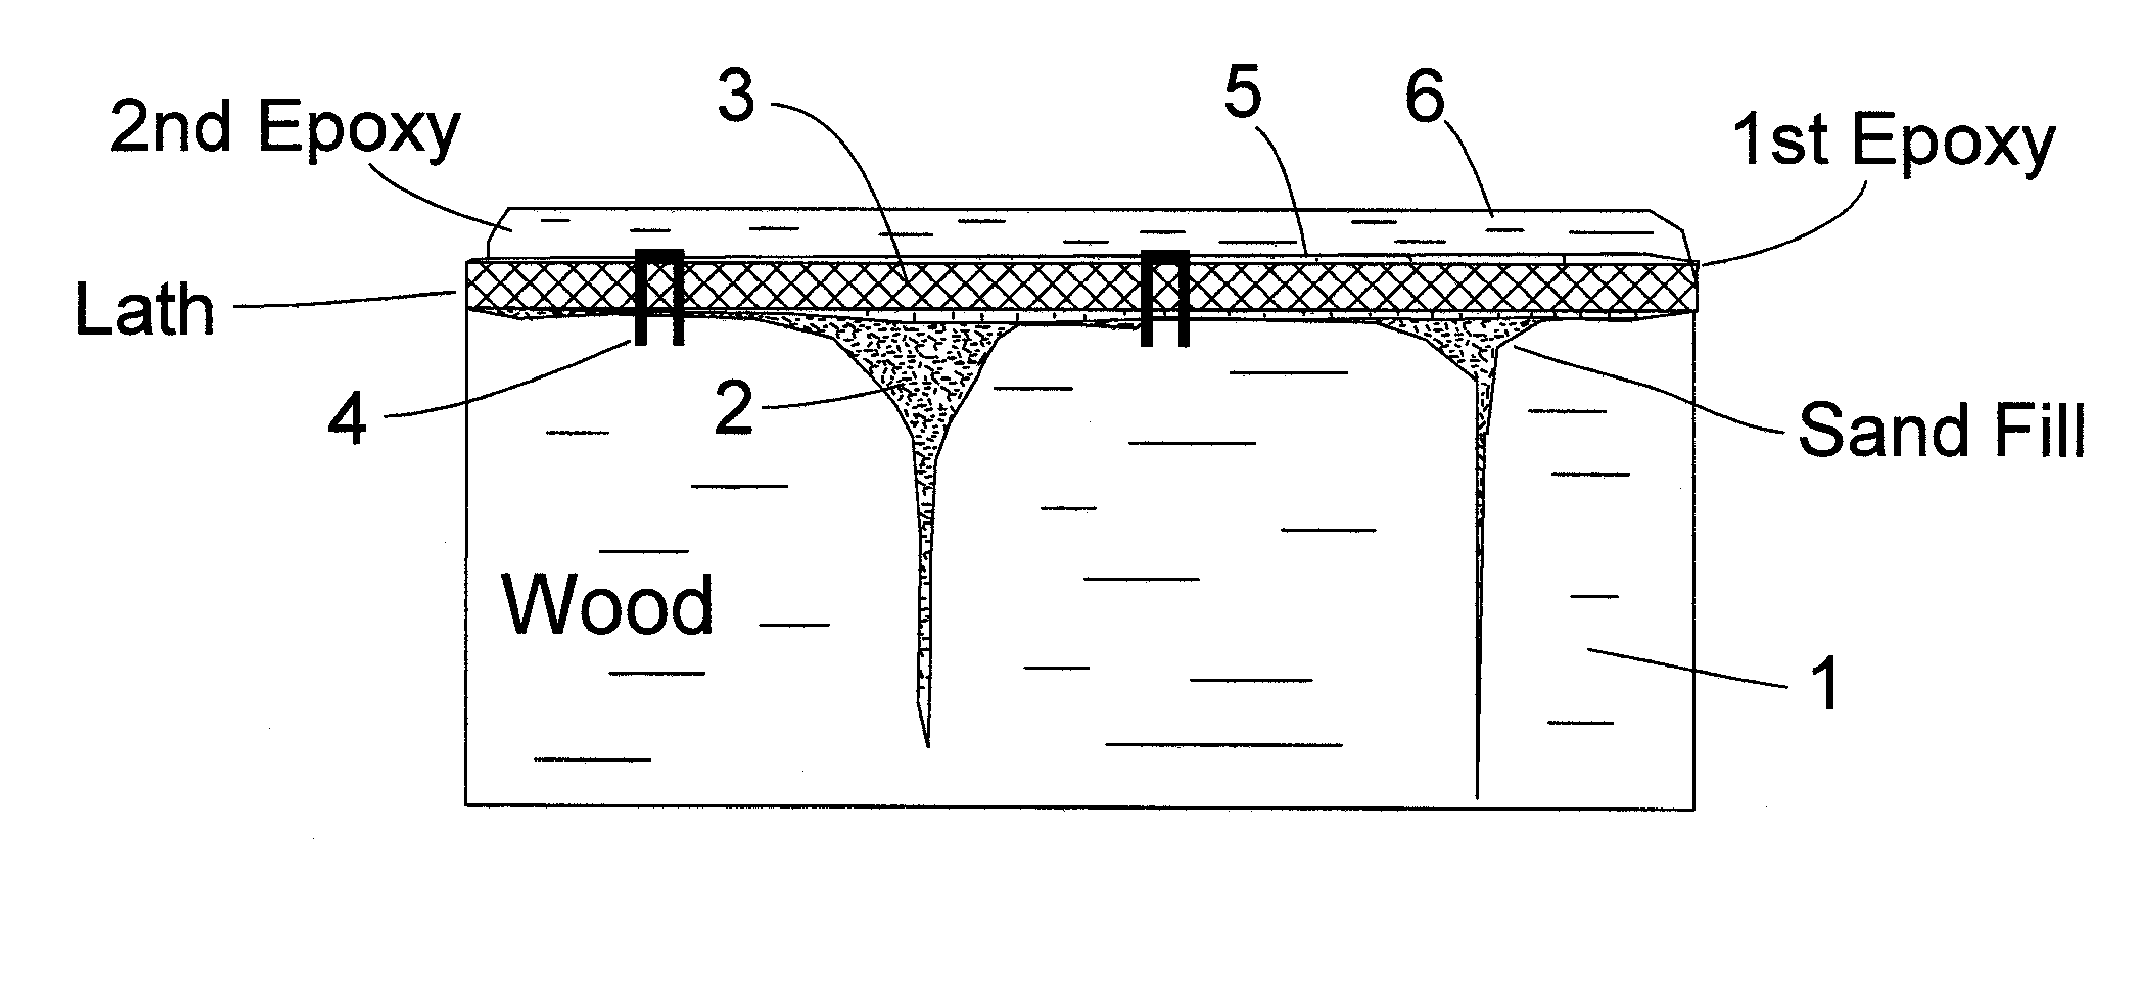 Method and System for Remediating and Covering Wood Floors